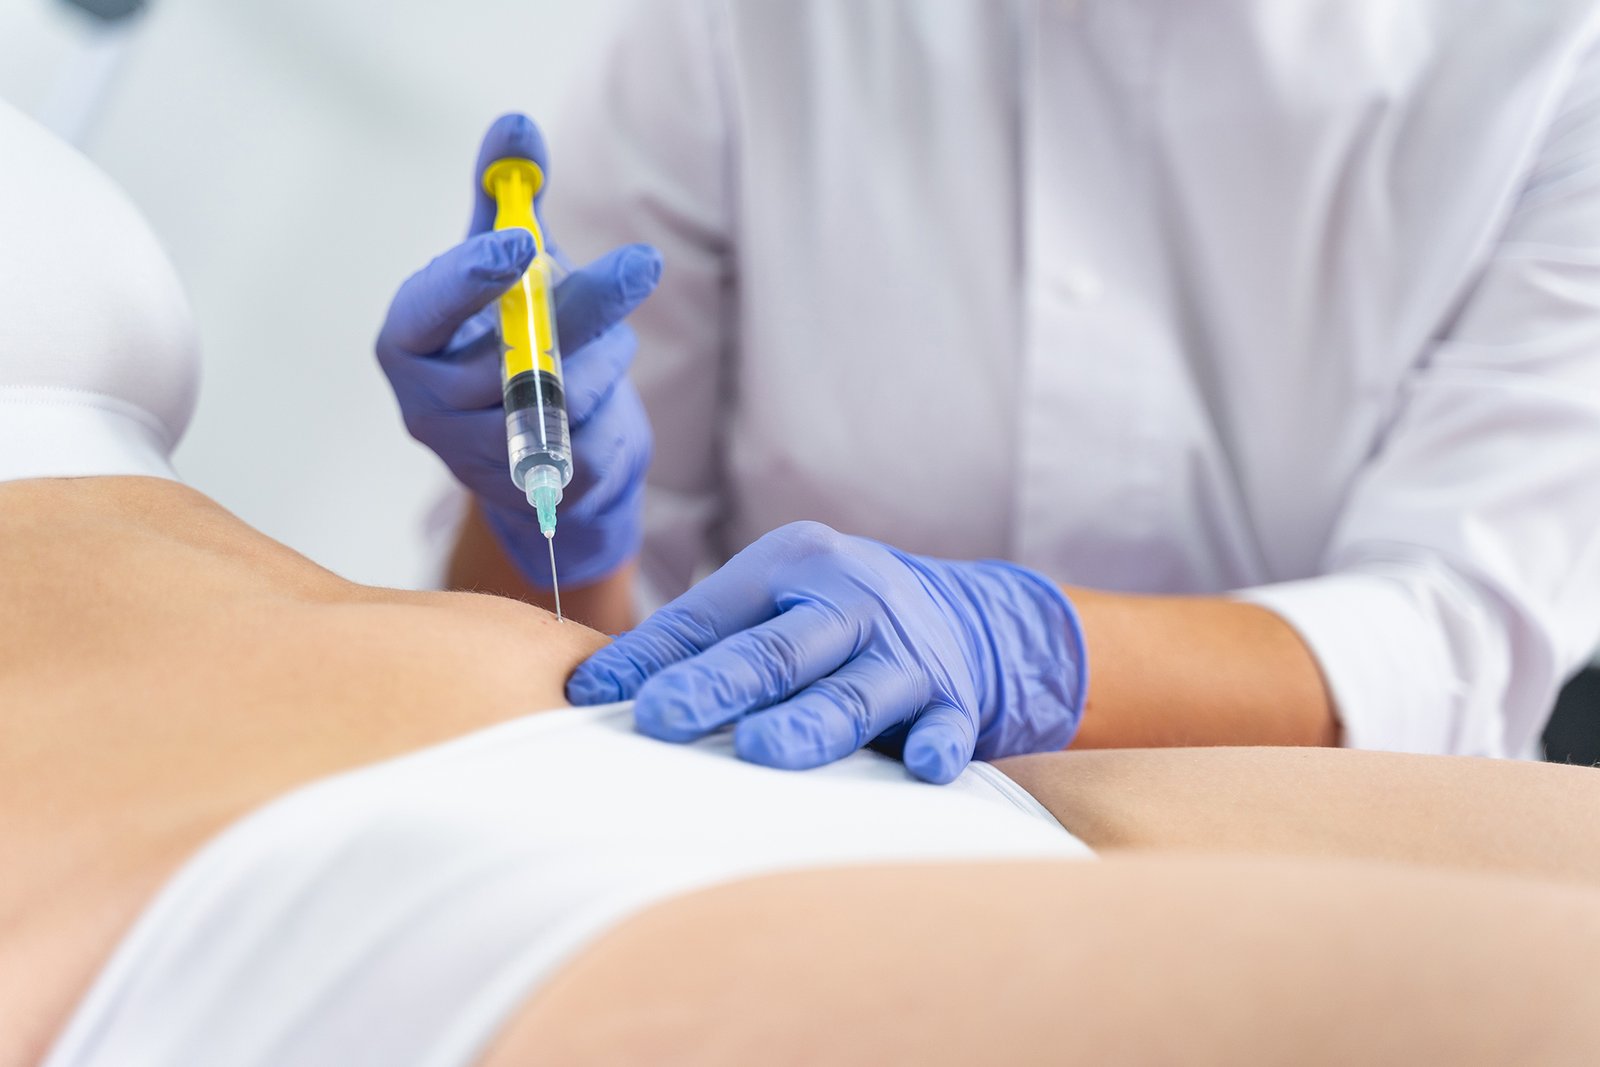 Female patient receiving fat disolving injection